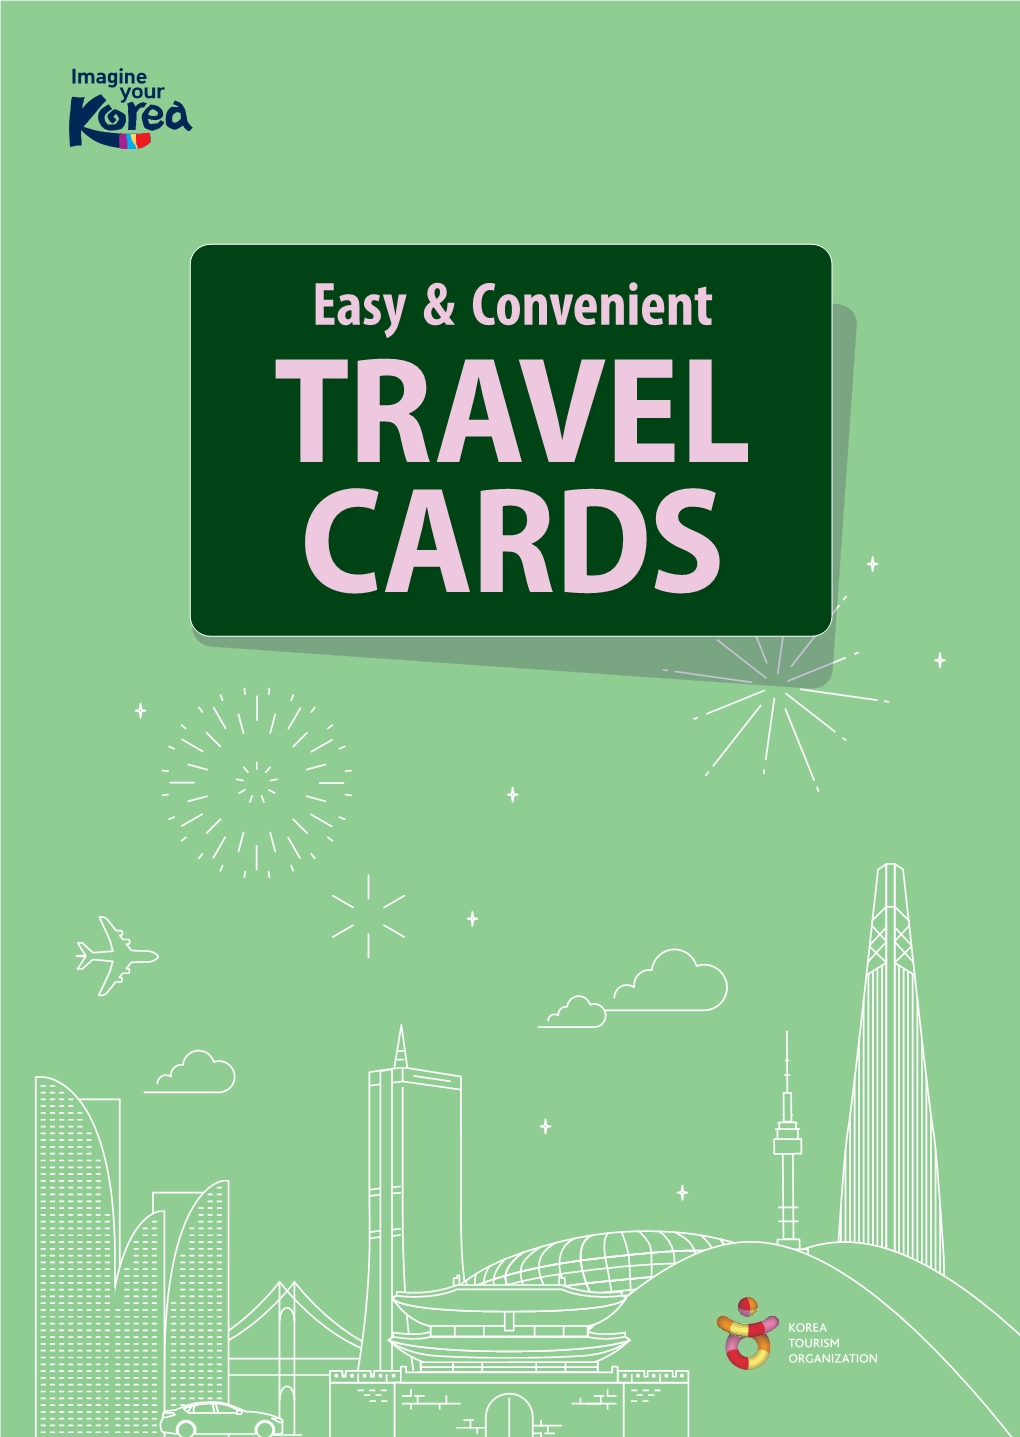 TRAVEL CARDS There Are Various Travel Cards You Can Choose from When Traveling in Korea Such As Tour Passes and Transportation Cards